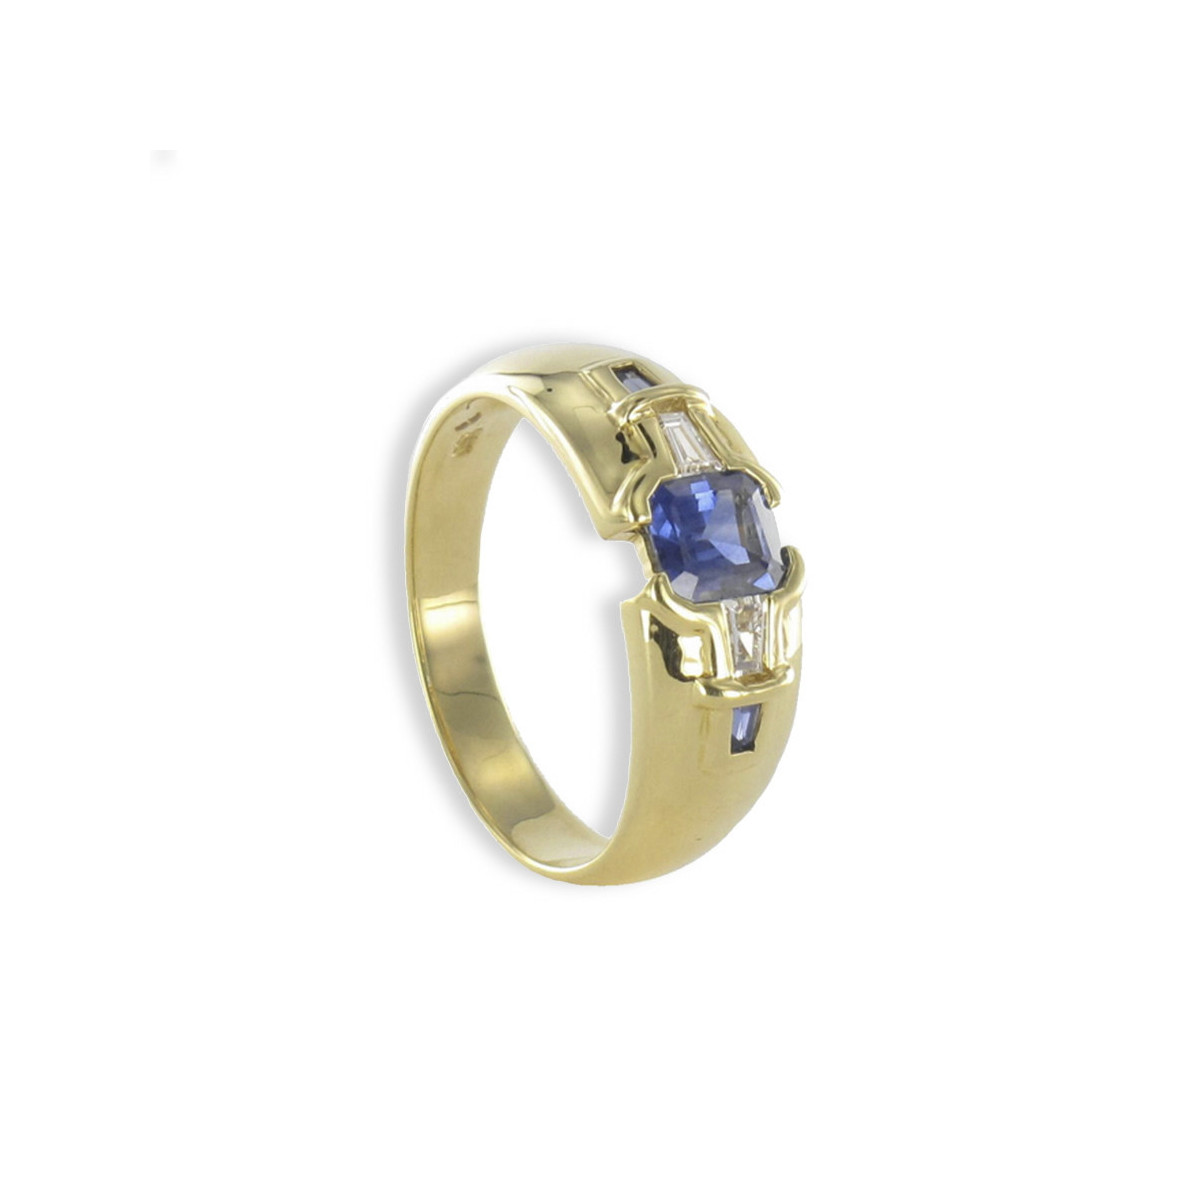 GOLD RING WITH PRECIOUS STONES